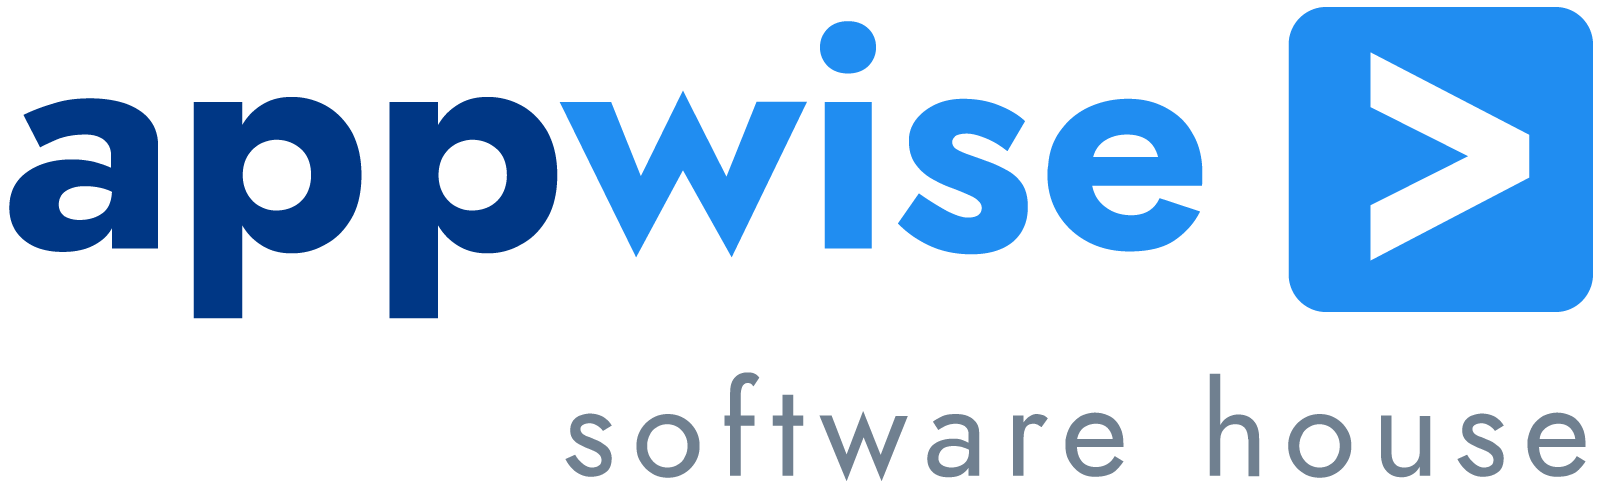 Appwise Software House Web Design (UI/UX) Poland